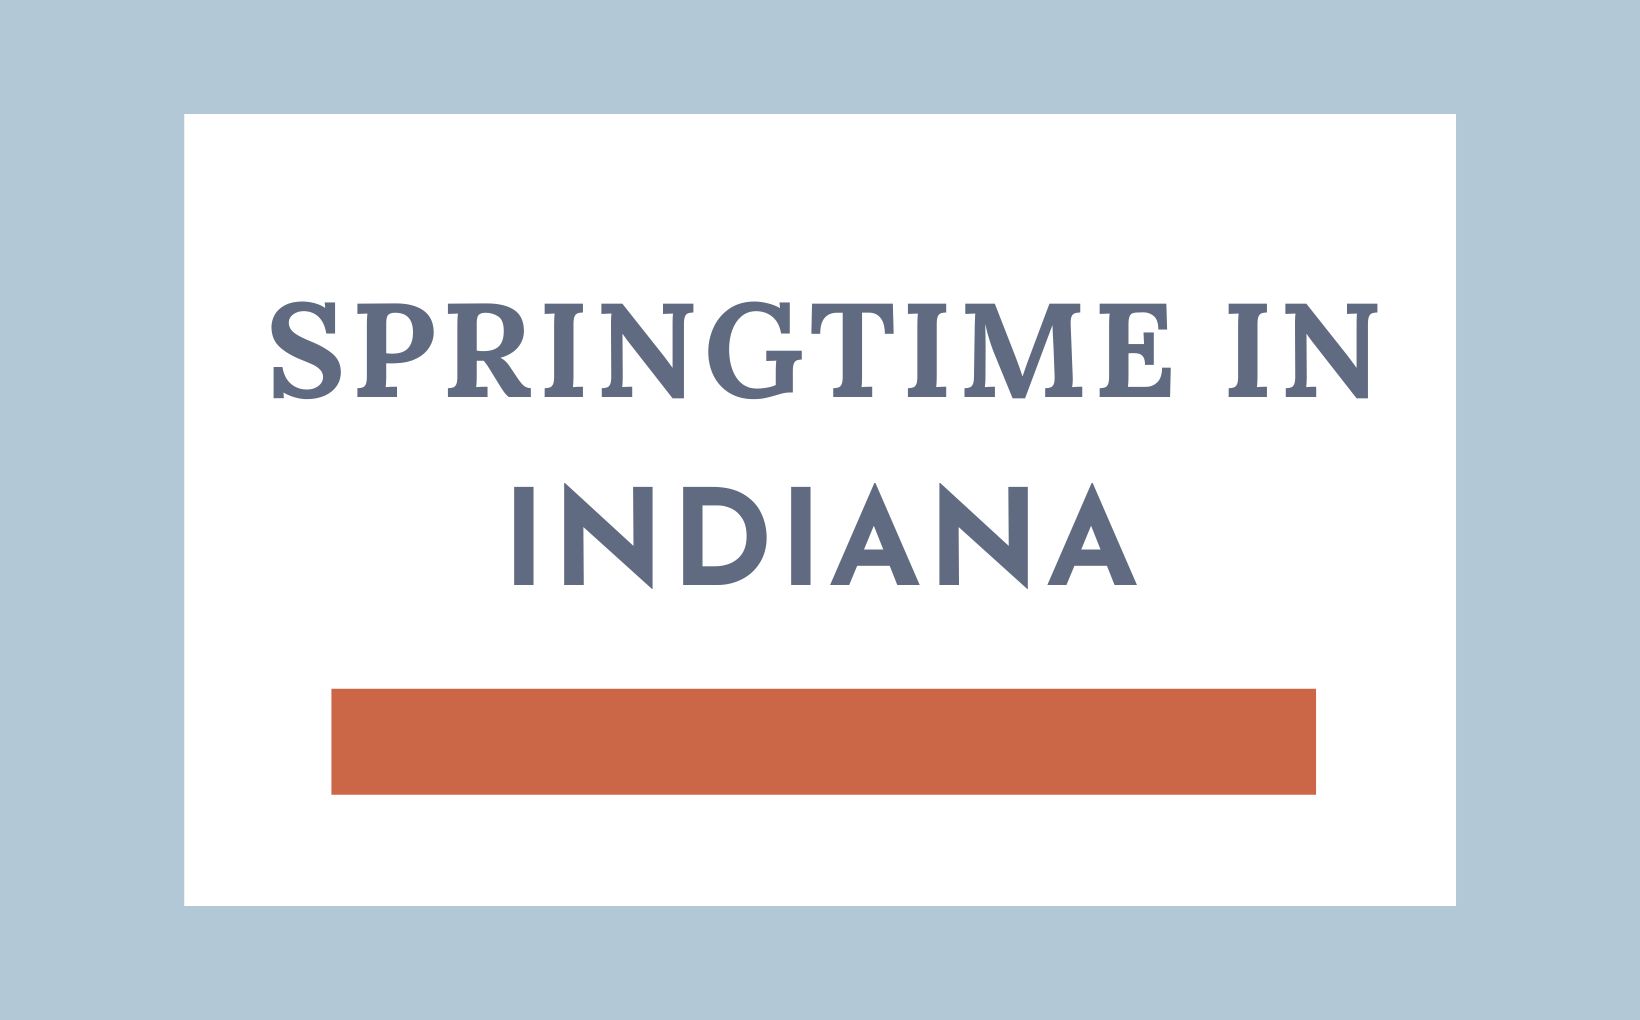 Springtime in Indiana feature image